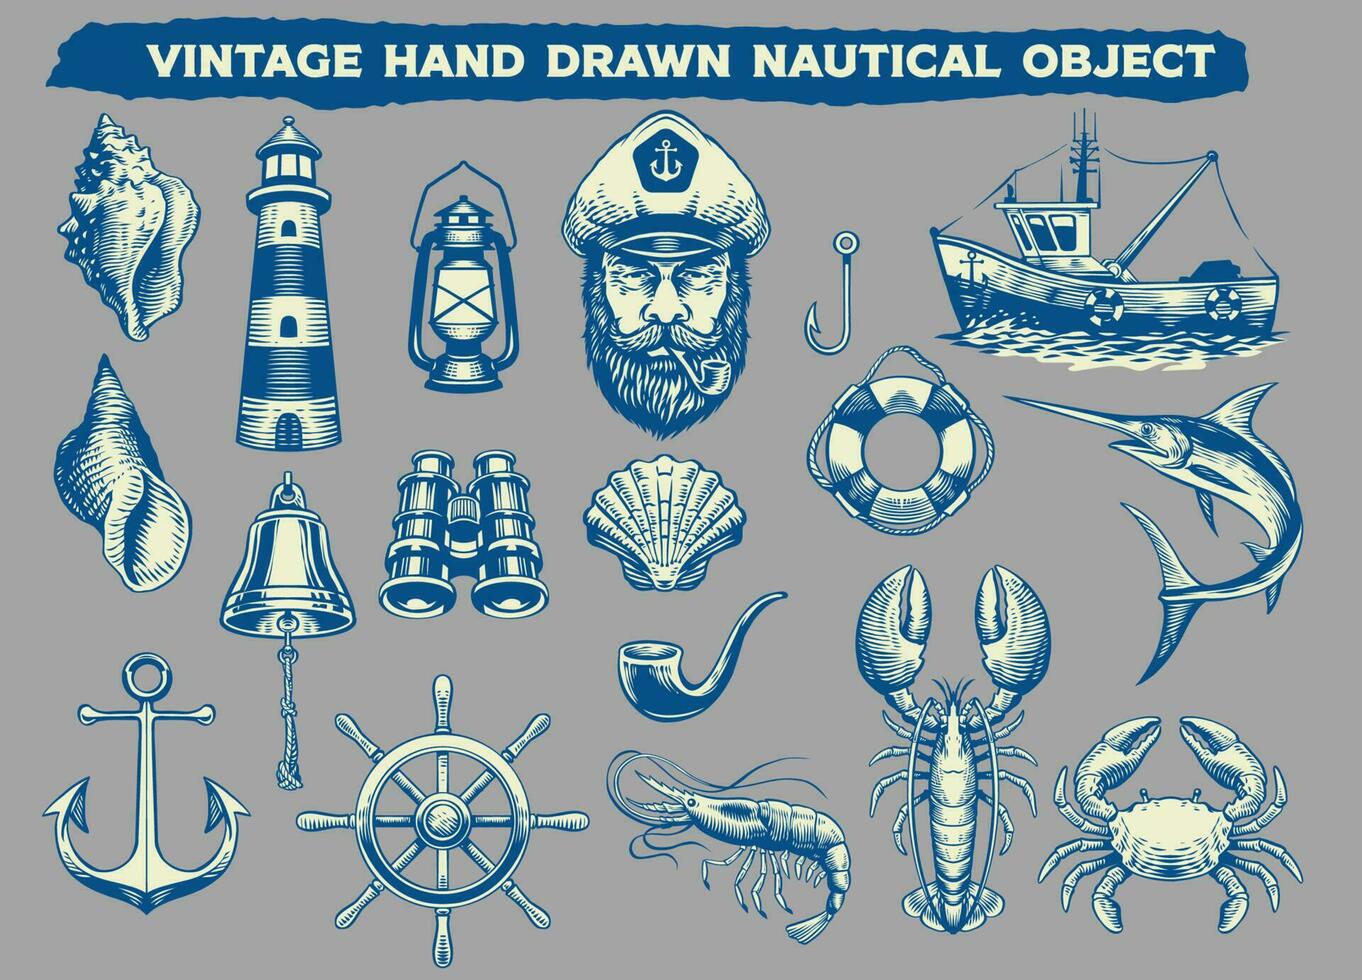 Vintage Hand Drawn Nautical Object vector